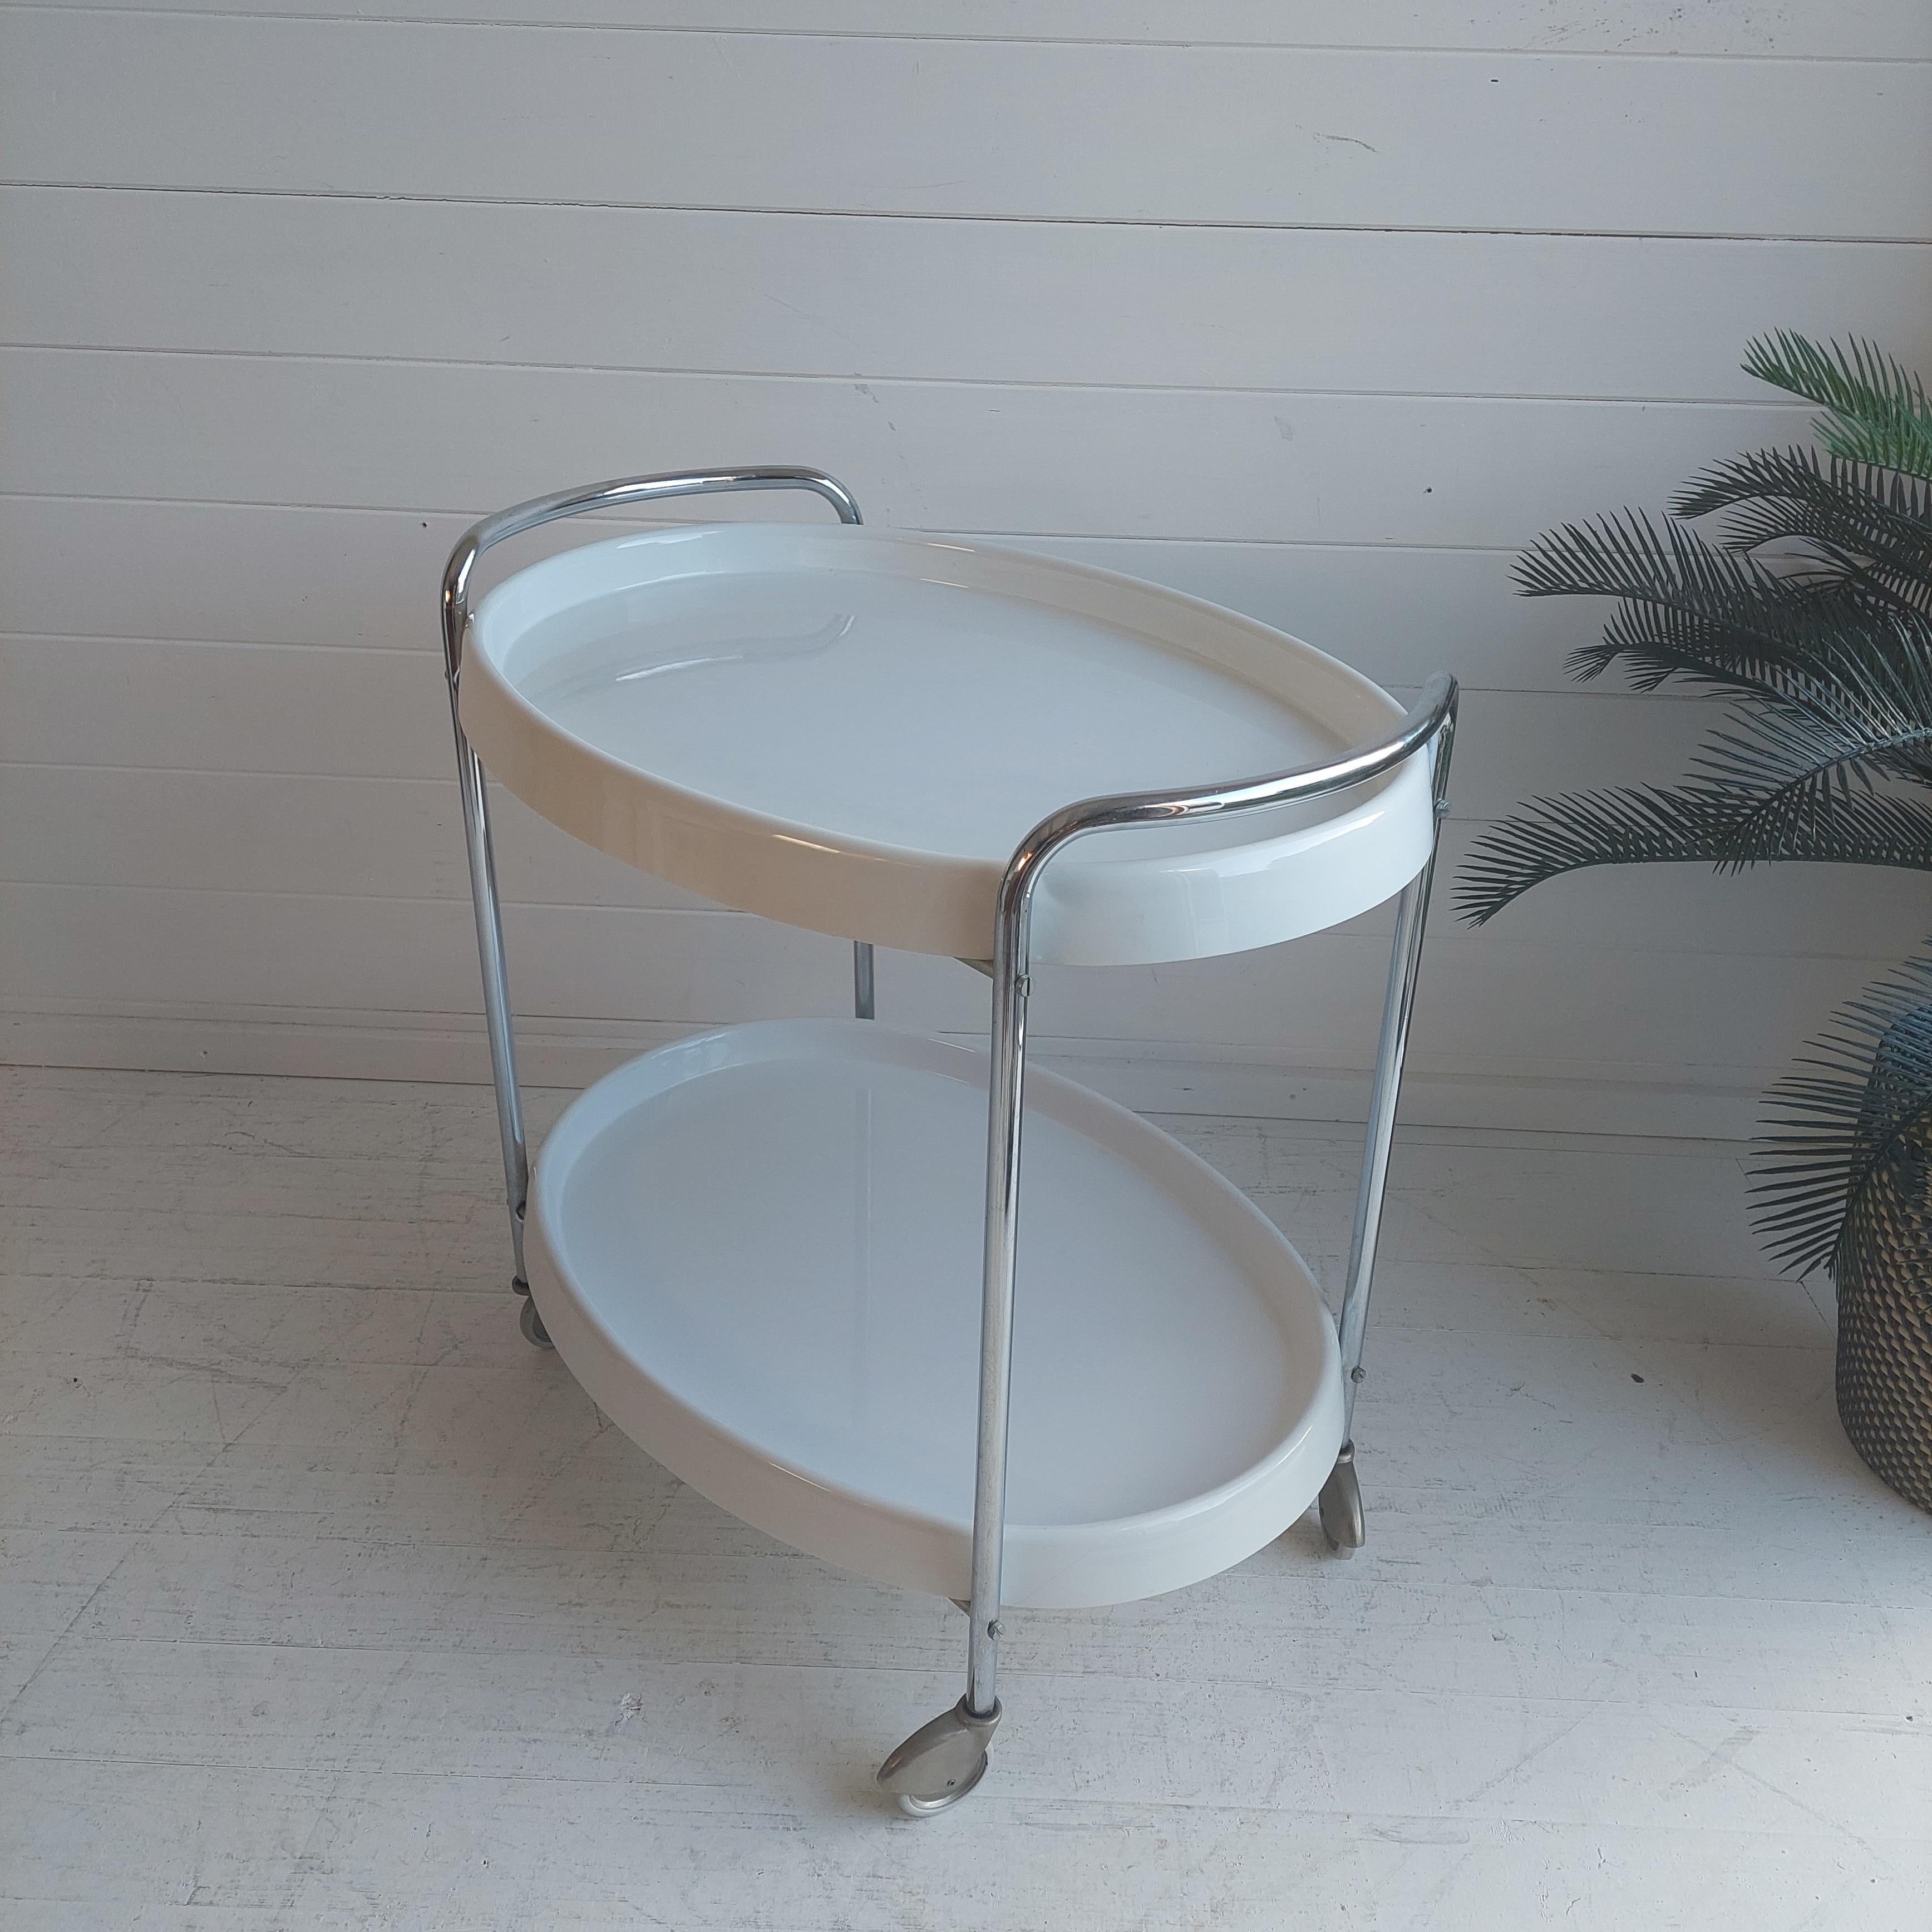 Exclusive midcentury white plastic & chrome metal oval bar cart. 
This very rare piece was produced in Italy in the 1950/60s. 

The presented Space Age vintage bar cart from the 1950/60s shows a chromed tube steel frame and four wheels for